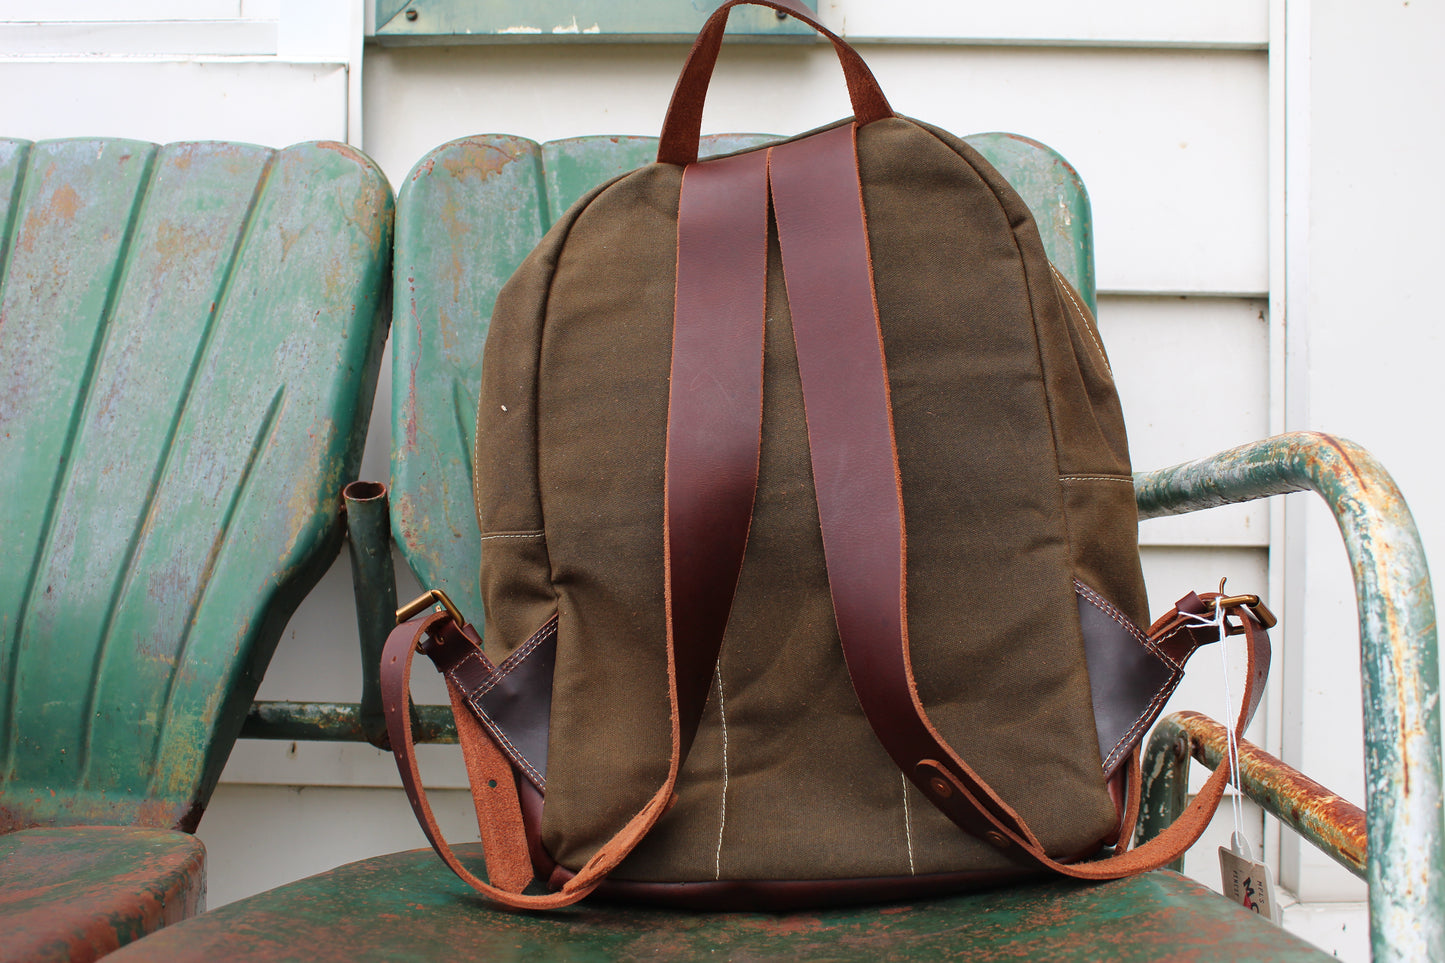 McPherson Goods "Classic Backpack"